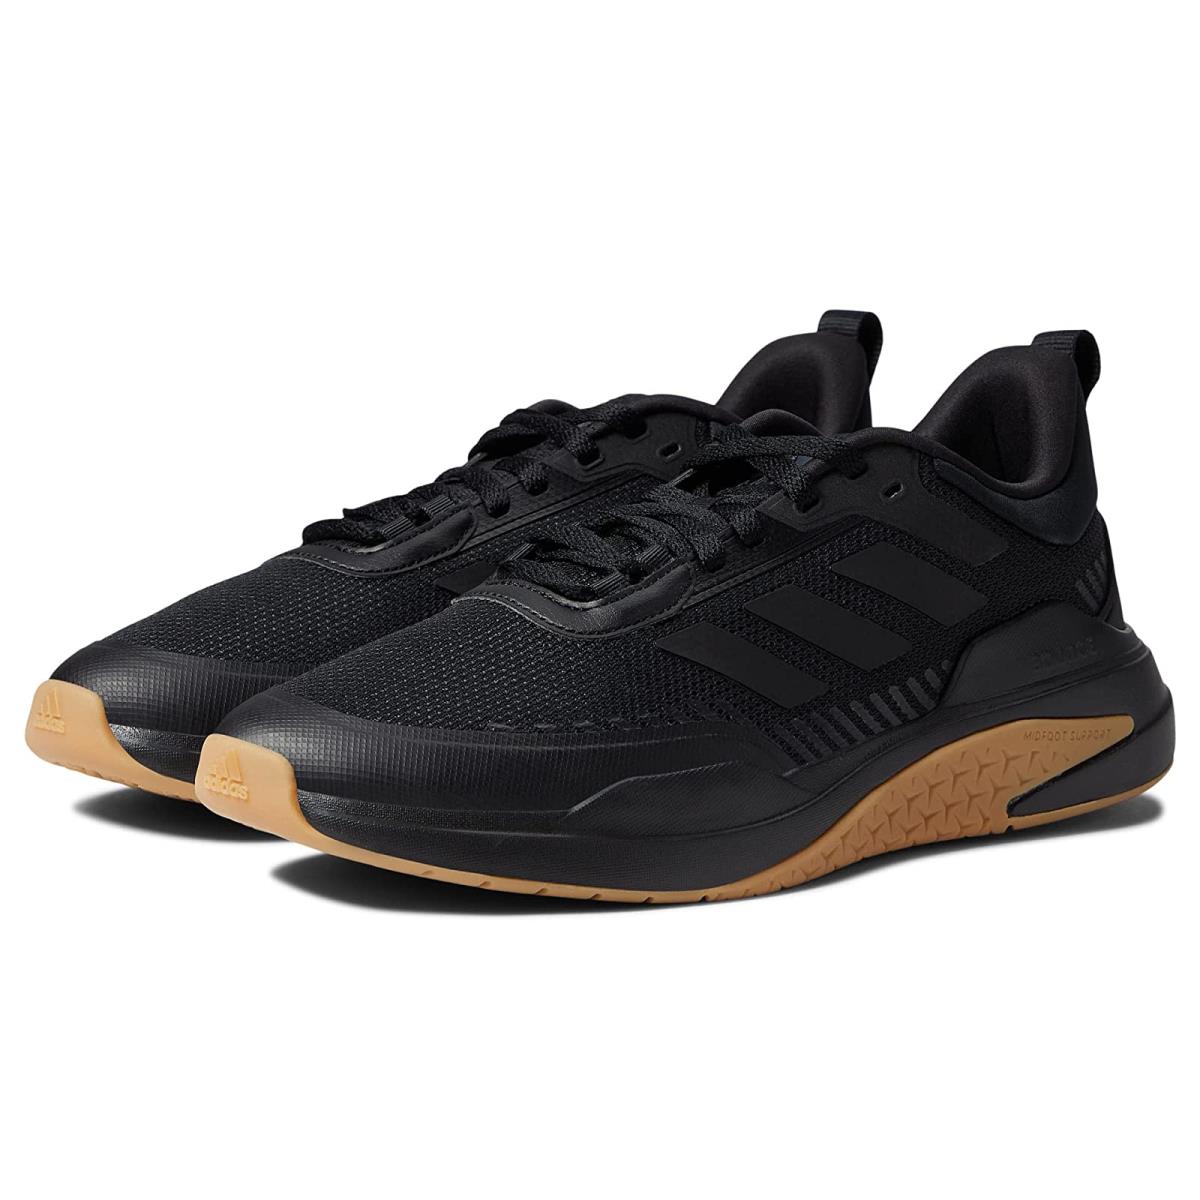 Man`s Sneakers Athletic Shoes Adidas Running Dlux Trainer Black/Black/Gum